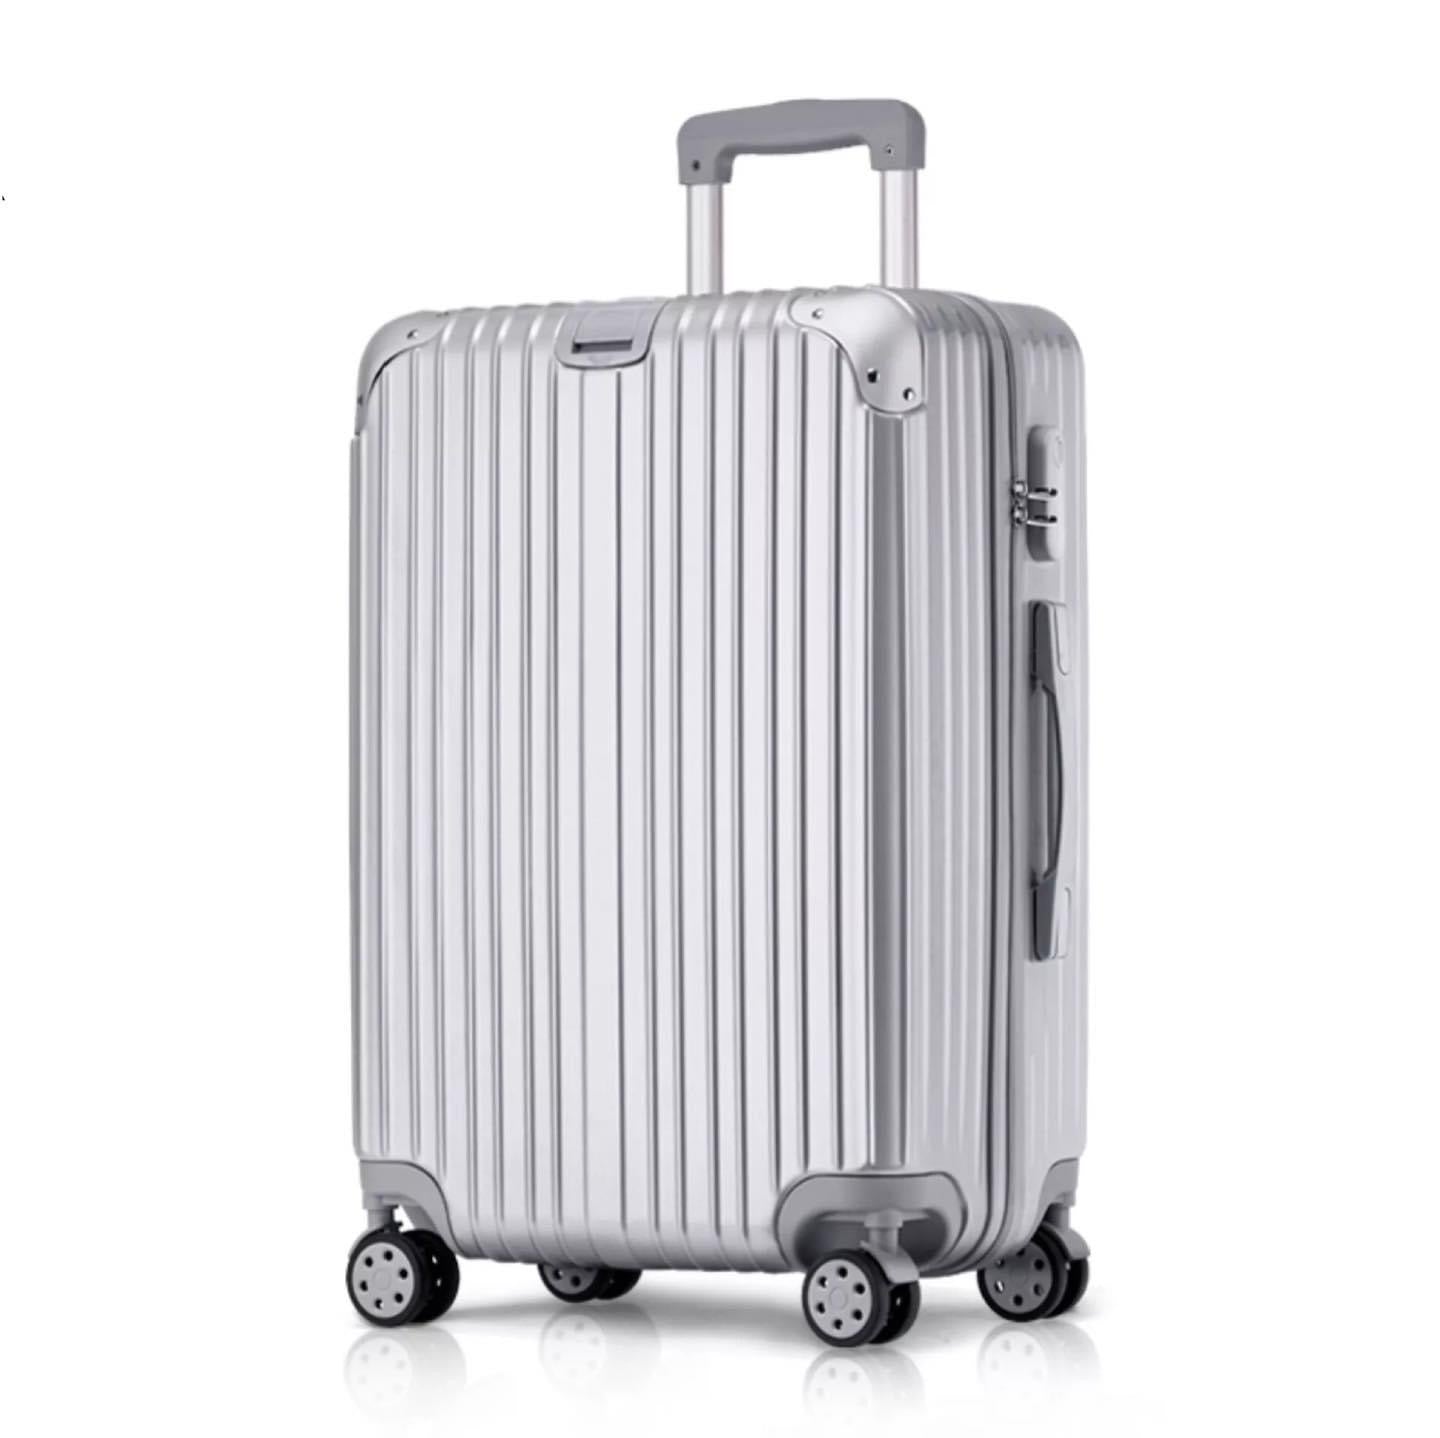 24" Silver Colour Aluminium Framed Hard Shell Without Zipper TSA Luggage with Spinner Wheel Zaappy